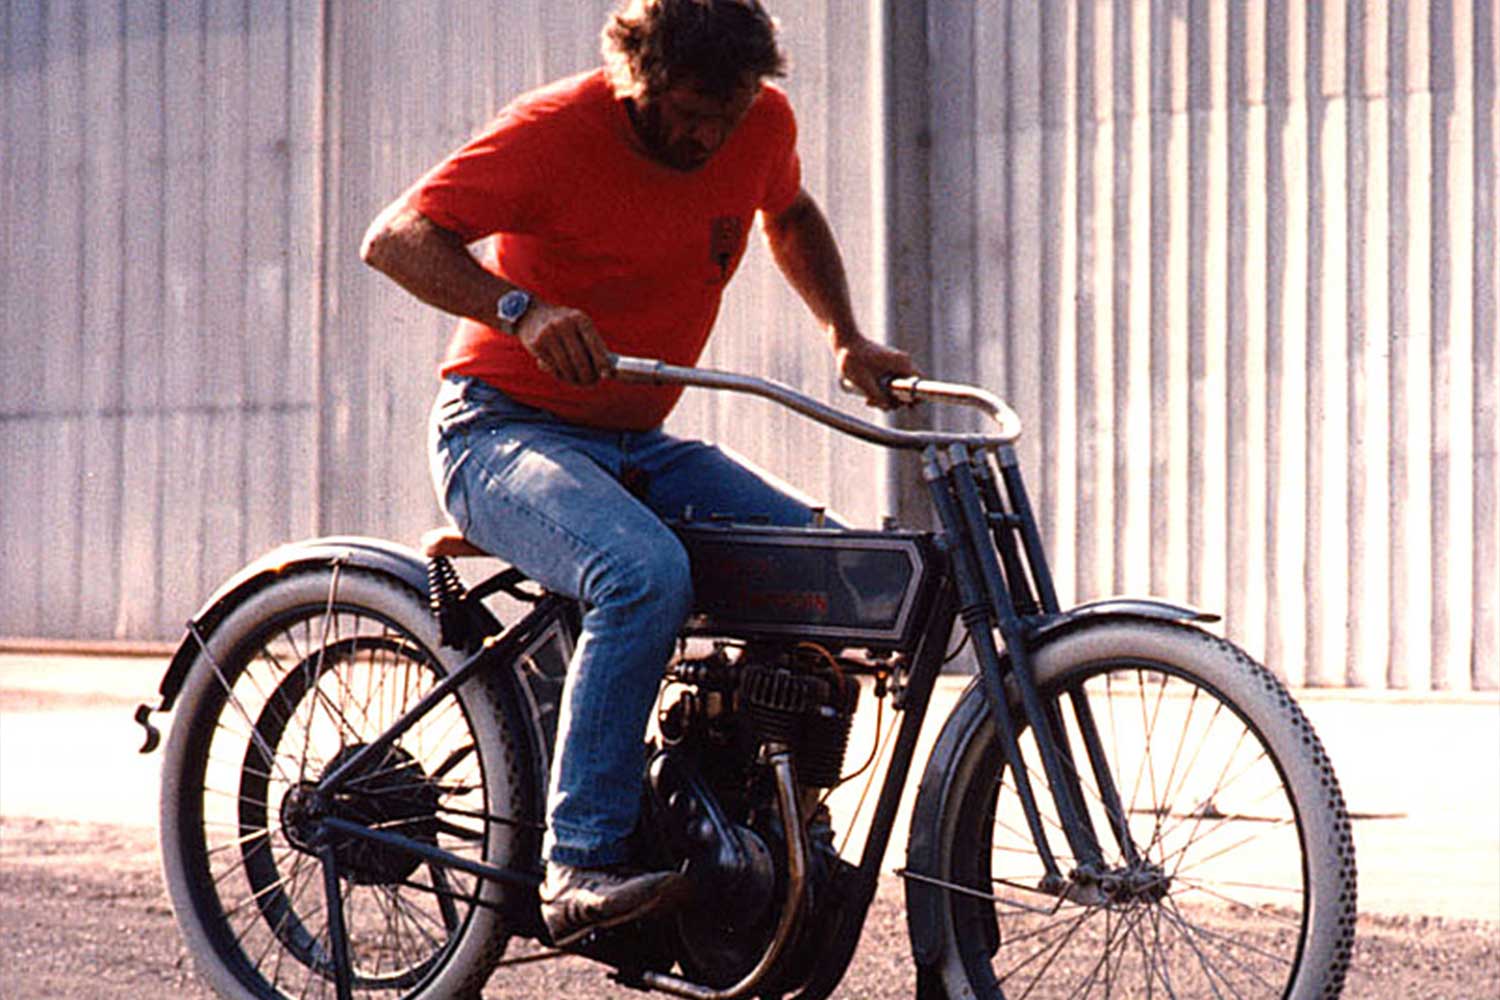 Towards the end of his life he lived in an airport hangar where he housed his collection of rare and collectible cars and motorcycles. In the photo below we see Steve McQueen checking out one of his very early vintage Harley Davidson motorcycles and on his wrist is of course the Submariner (rolexmagazine.com)